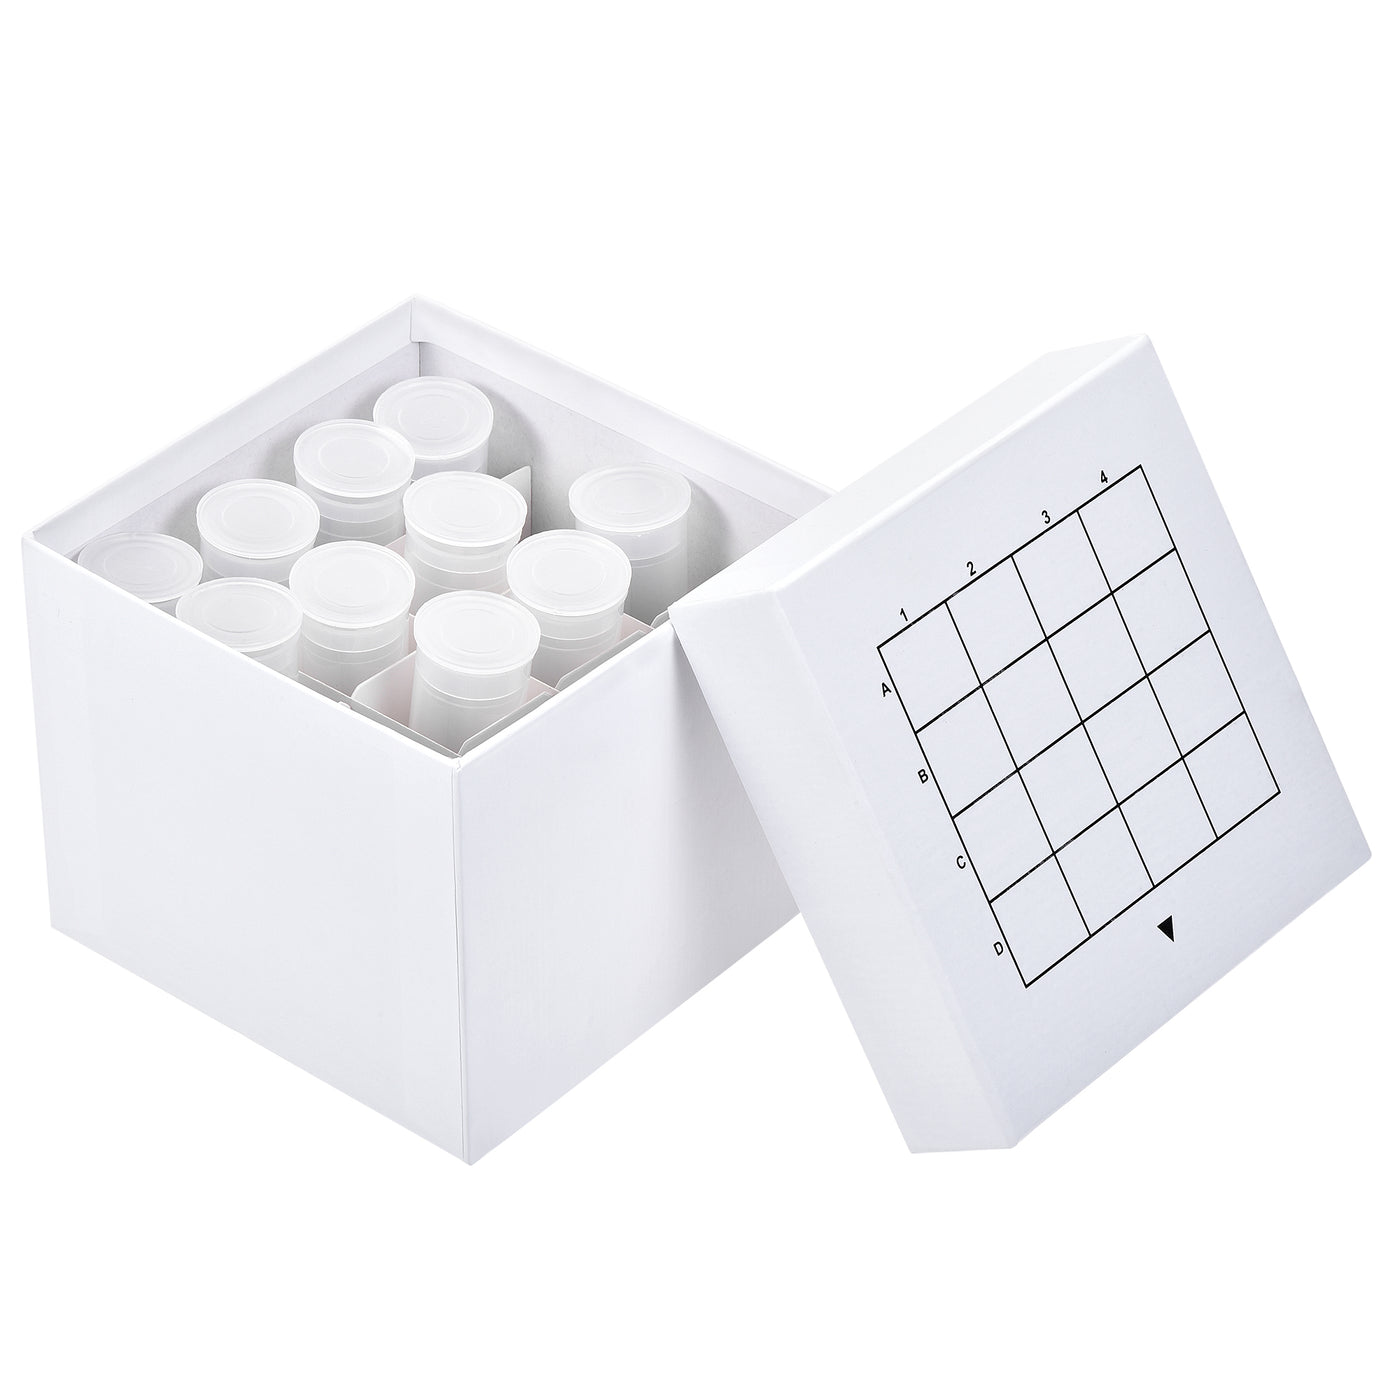 uxcell Uxcell Freezer Tube Box 16 Places Cardboard Holder Rack for 50ml Microcentrifuge Tubes, White 2Pcs